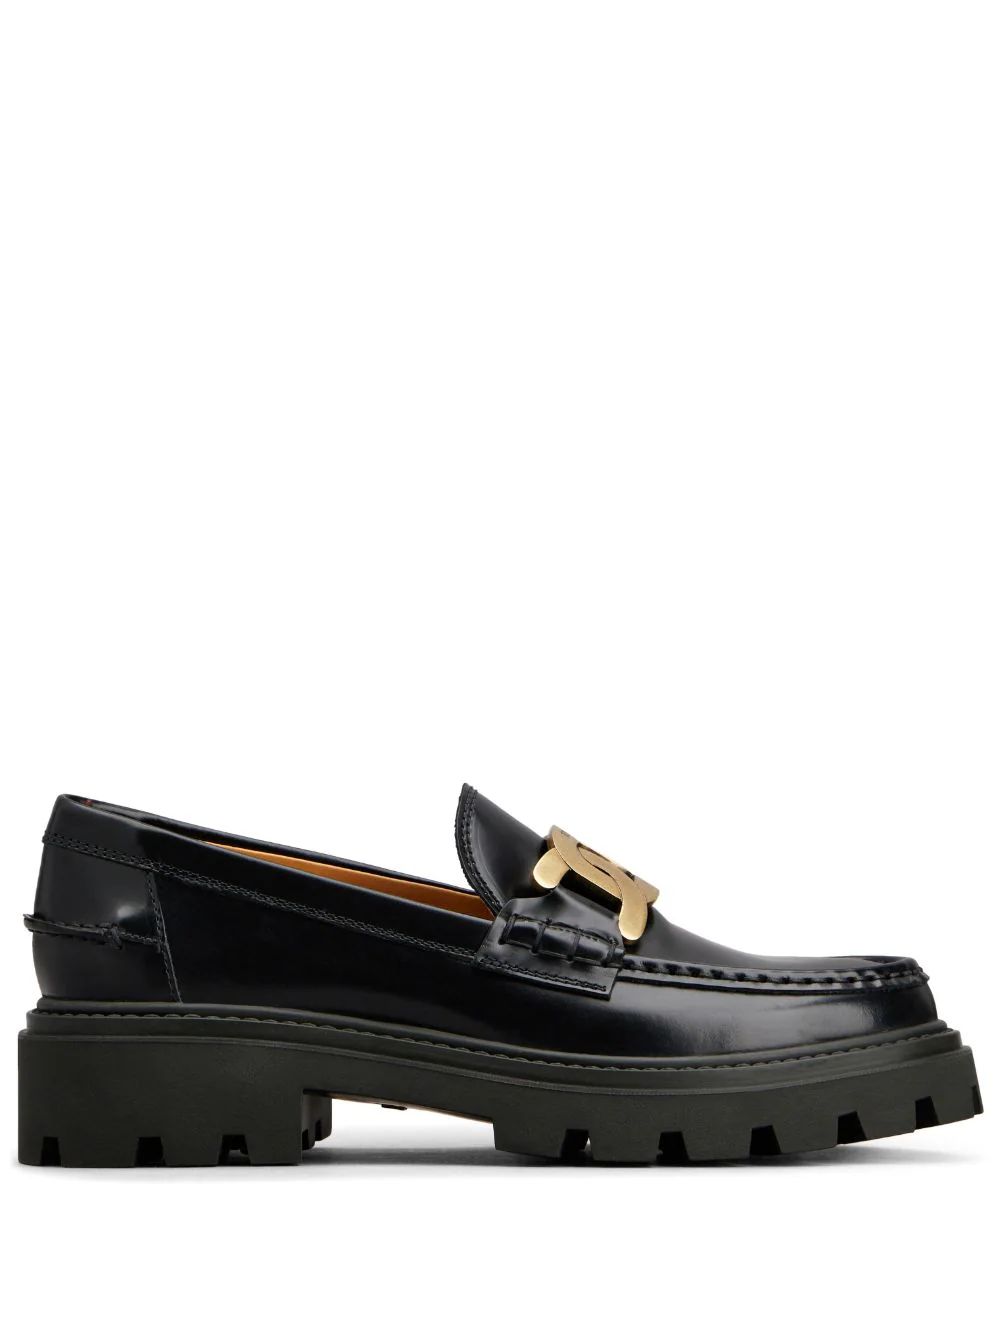 Gomma Pesante leather loafers | Farfetch Global